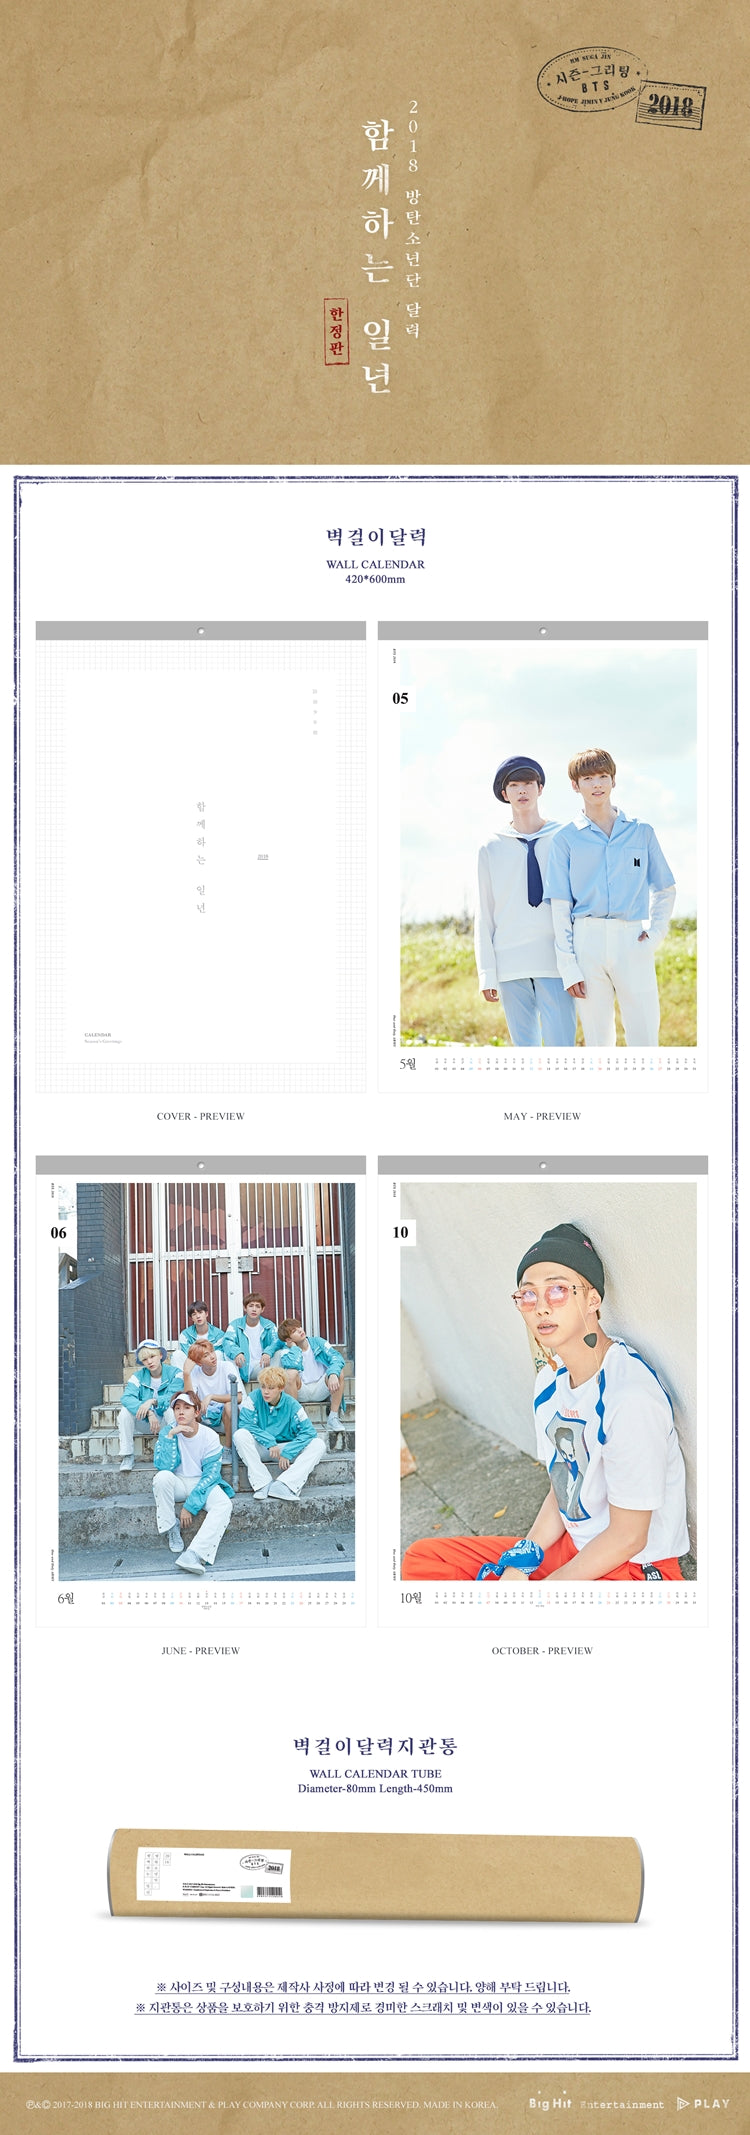 BTS 2018 Official Wall Calendar Limited Edition 14p POSTER TYPE Calendar In Tube